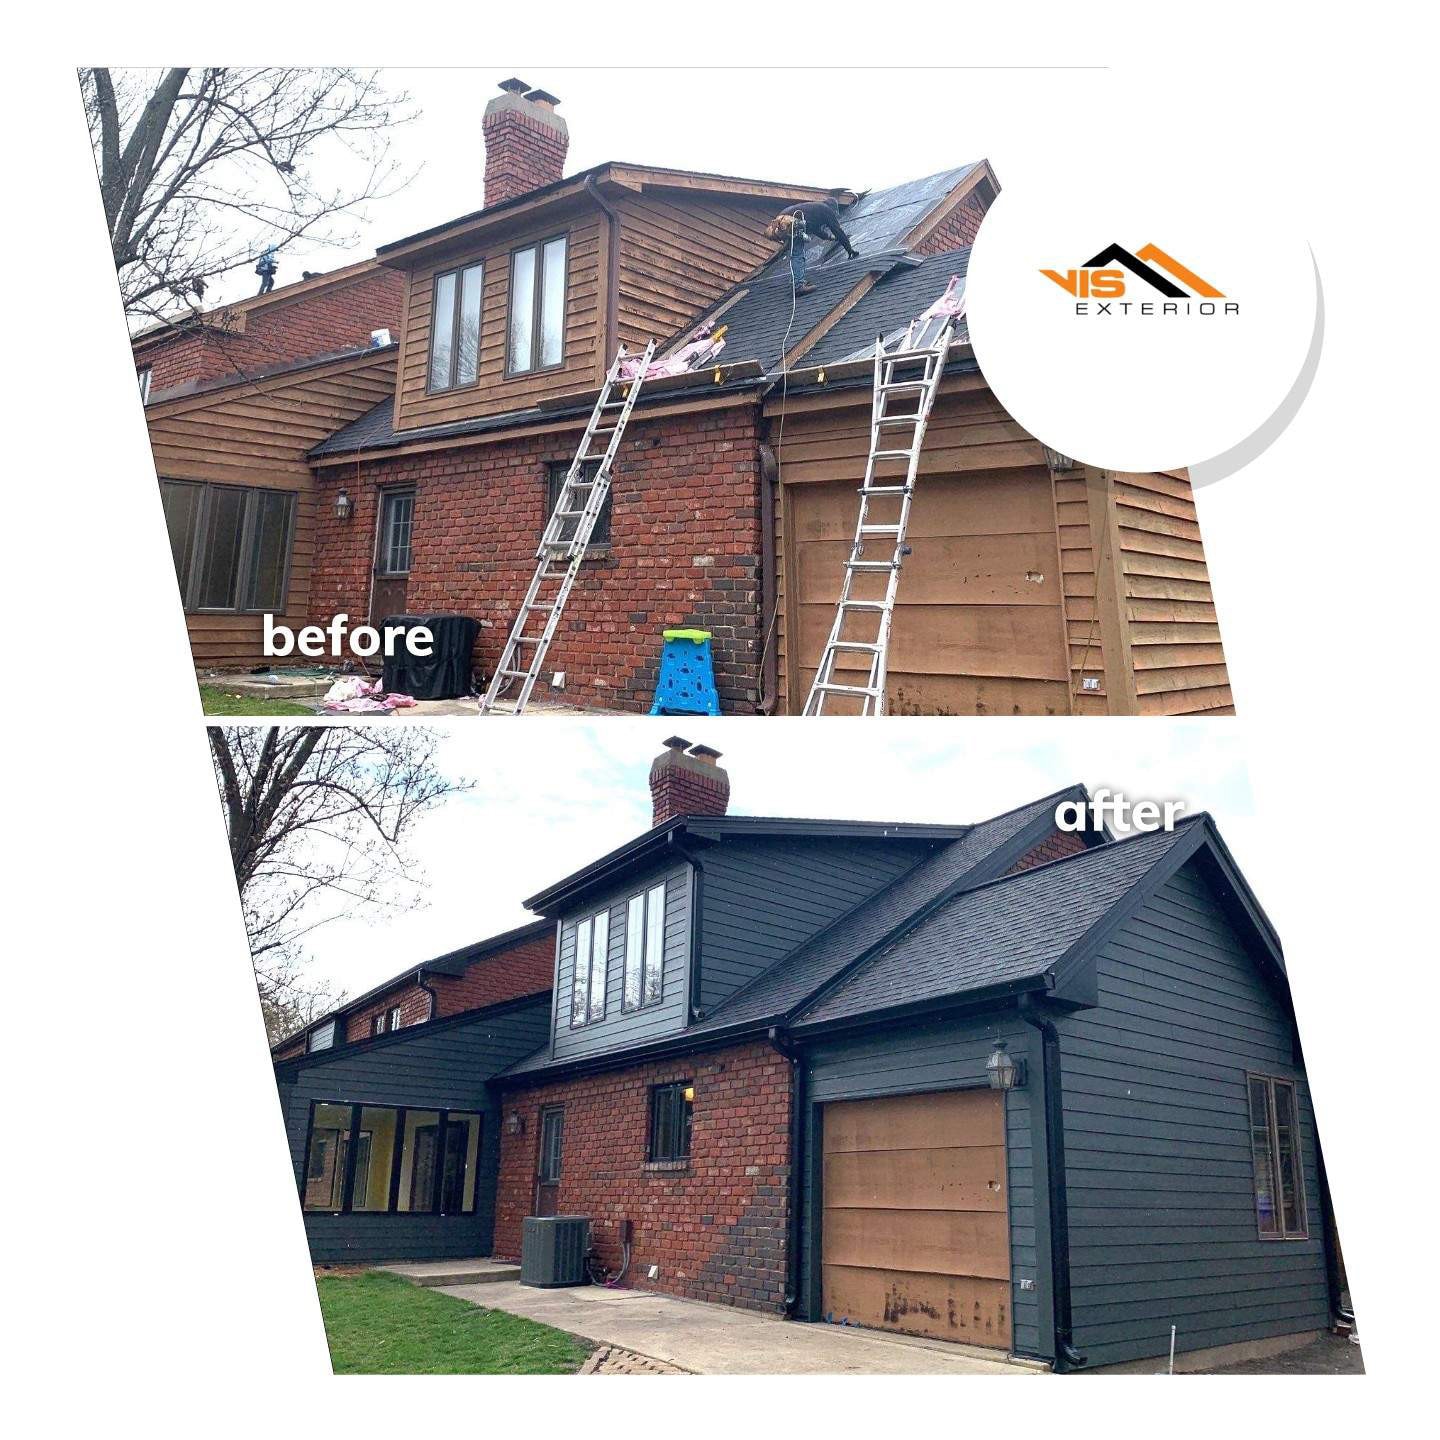 James Hardie siding installation and shingle roof replacement in Wheaton before after project photo